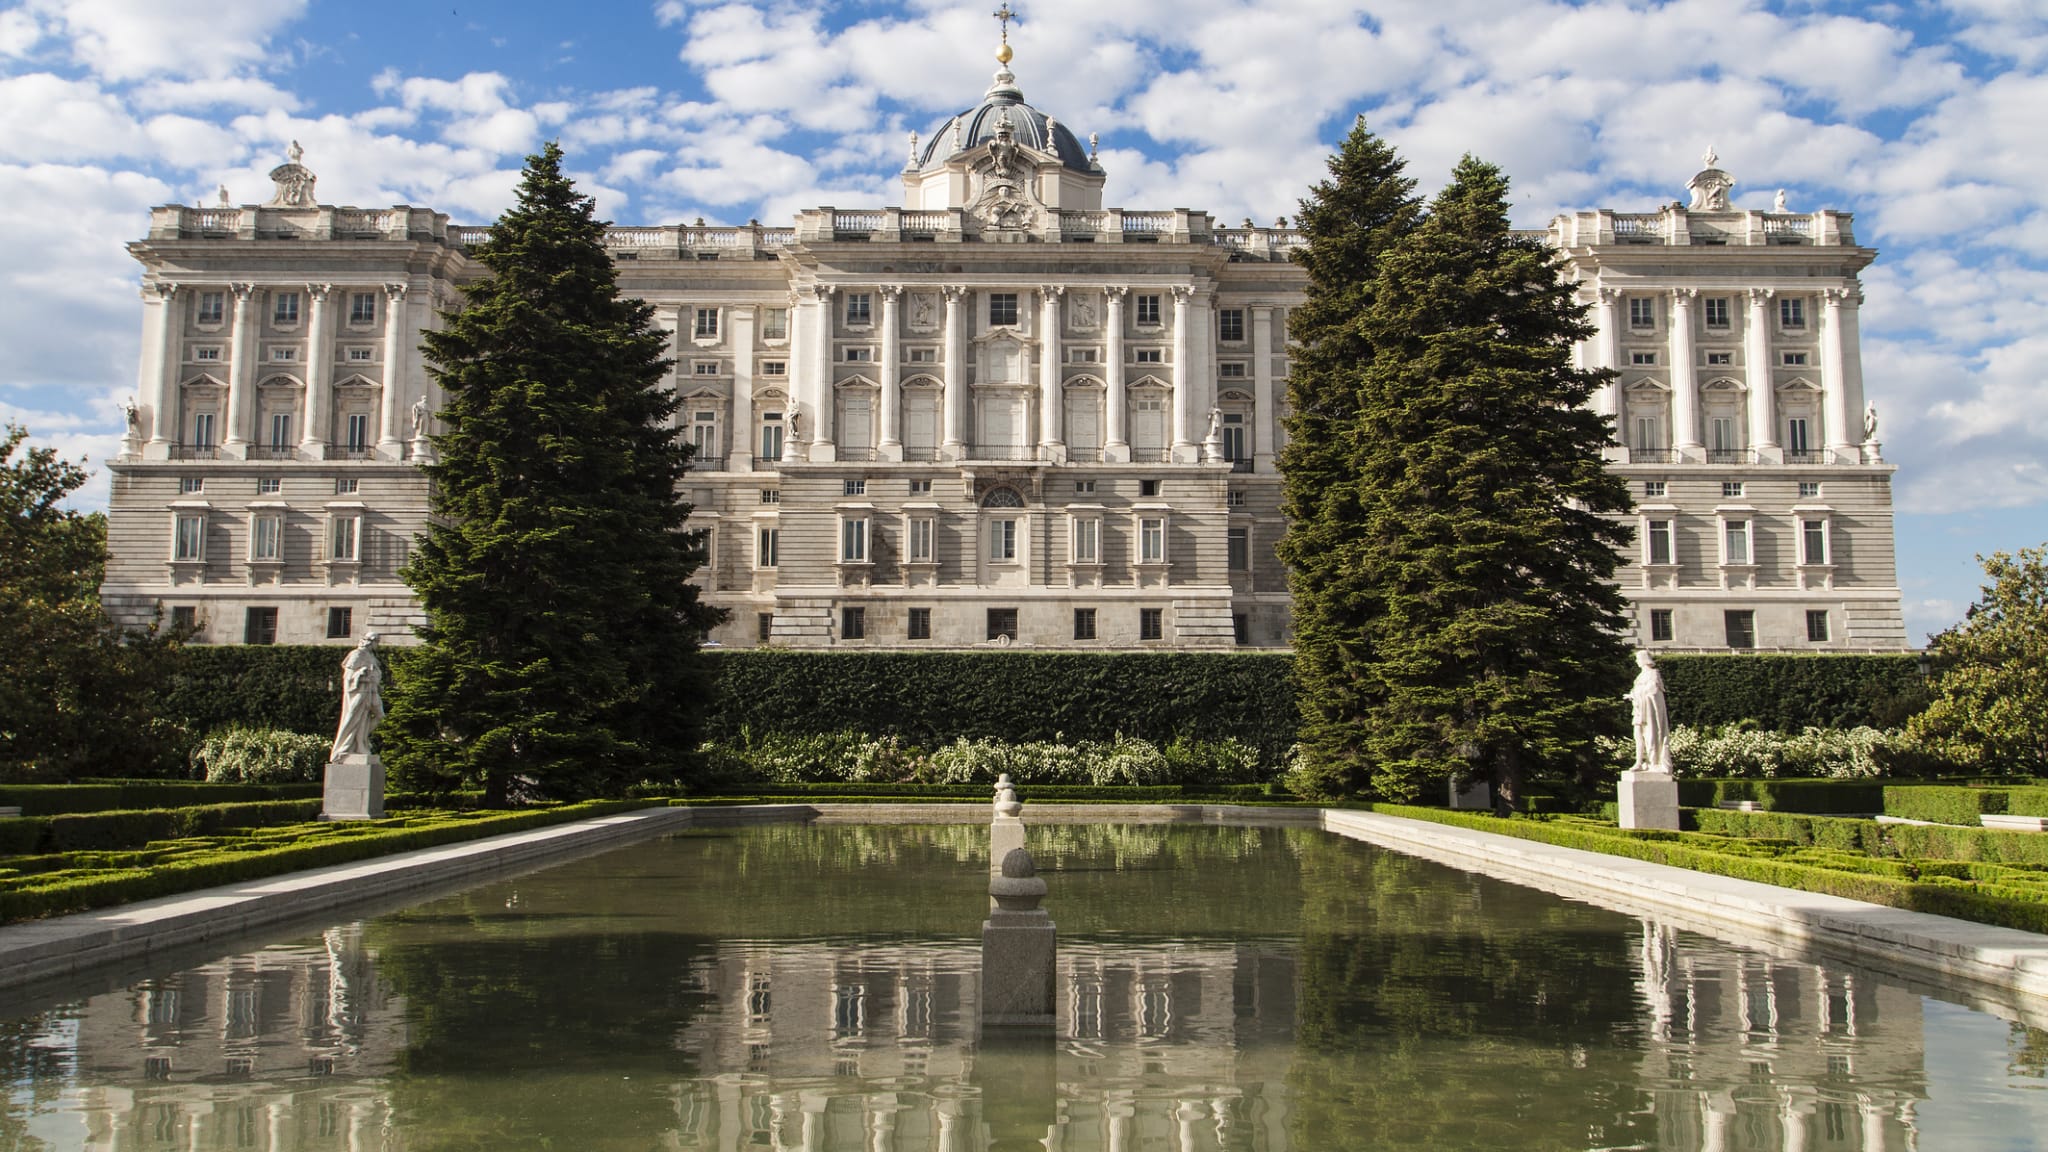 Palacio Real, Madrid, Spanien © somor/iStock / Getty Images Plus via Getty Images